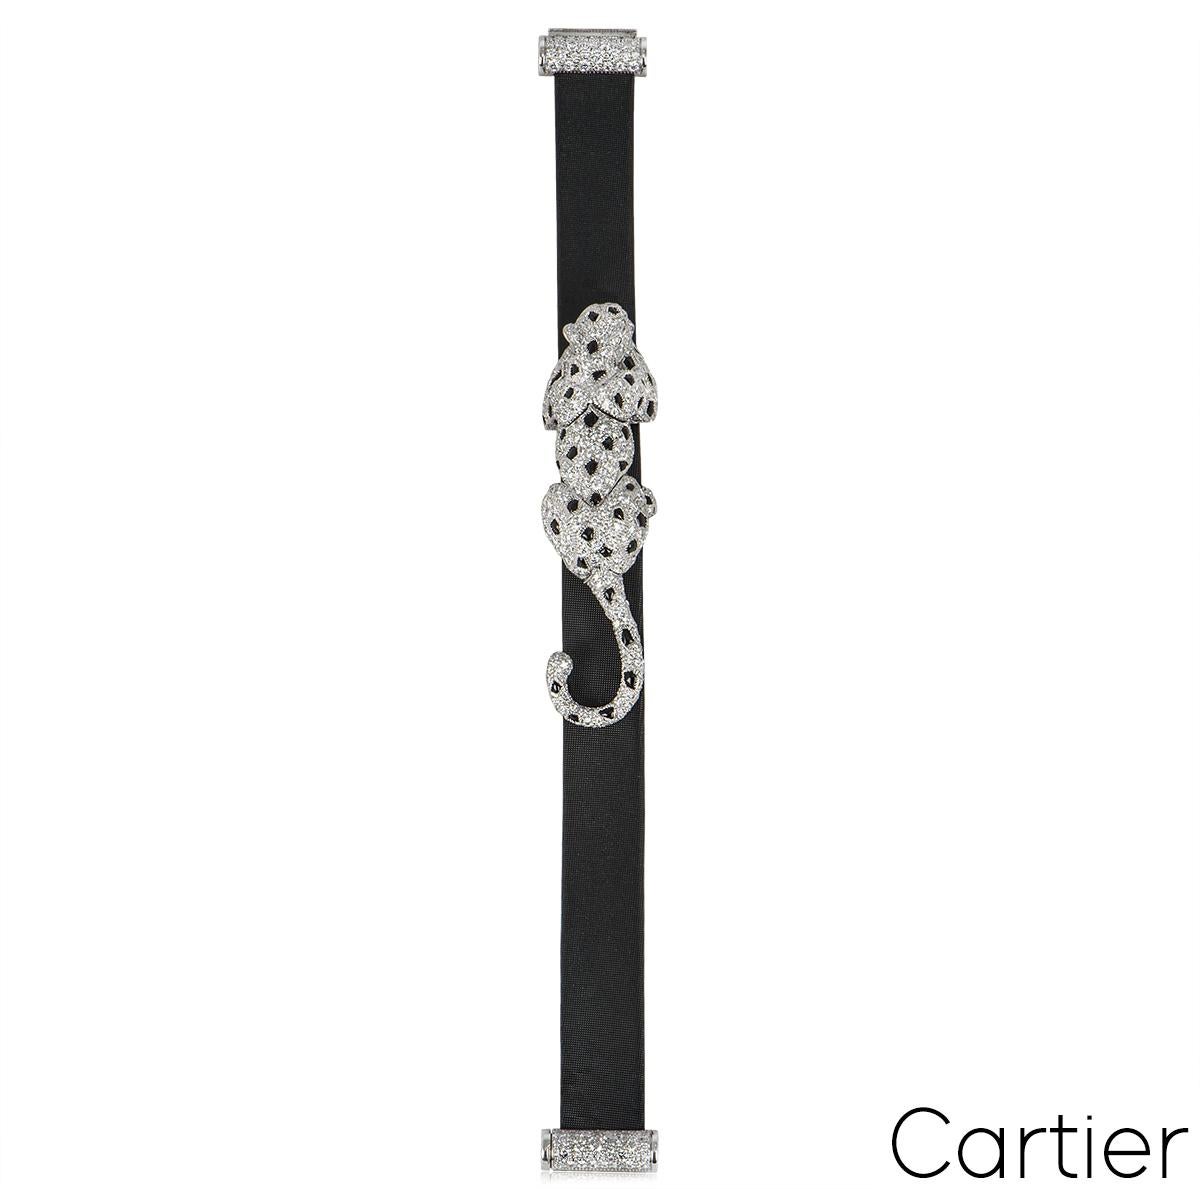 An exceptional Cartier 18k white gold diamond, onyx and emerald bracelet from the Panthere de Cartier collection. The bracelet features the iconic panther motif set with 2 pear shaped emerald eyes, 54 onyx spots and 581 pave set round brilliant cut